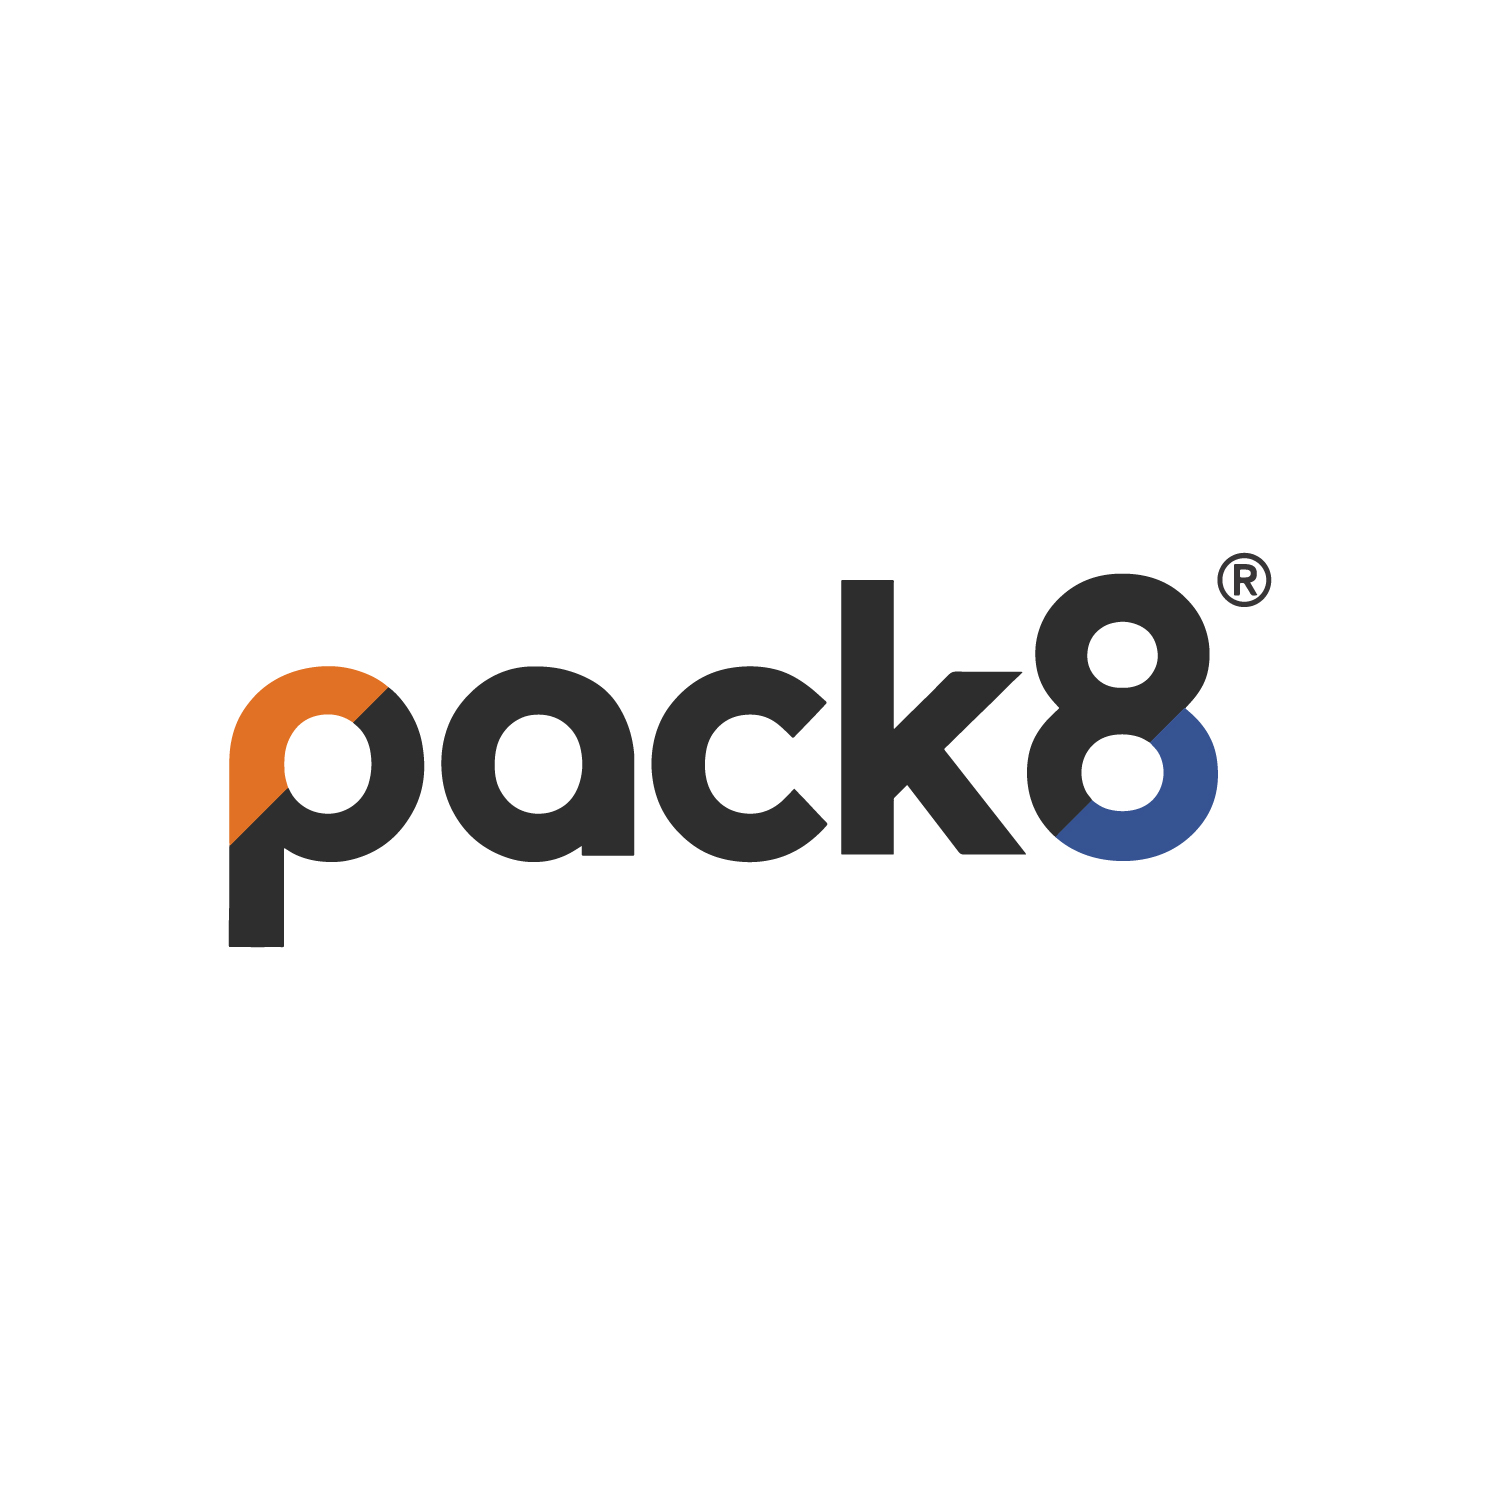 Sustainable Packaging Company In UK - Pack8